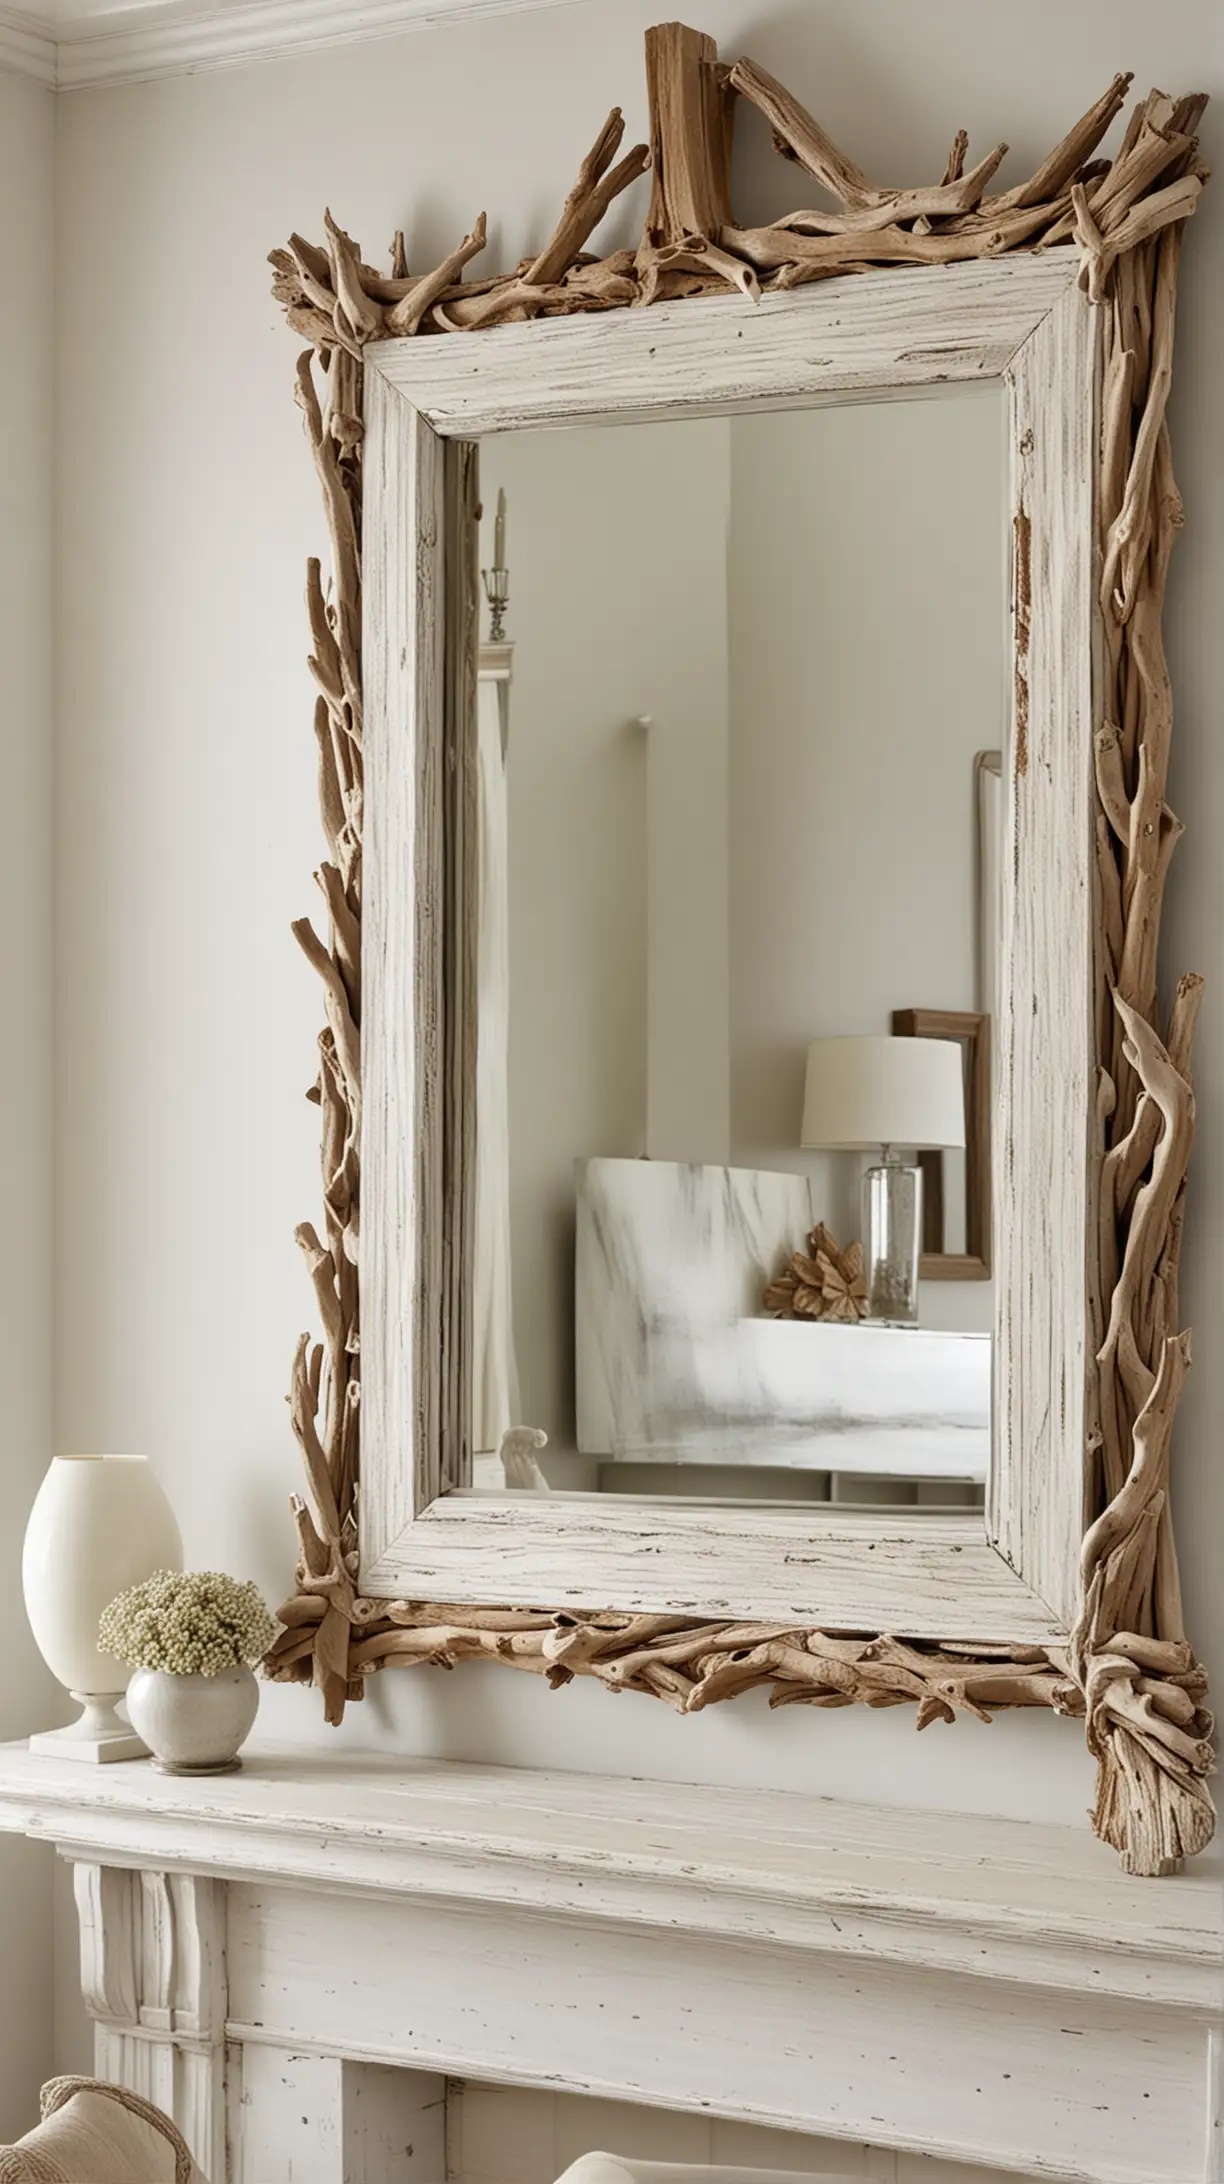 Coastal Chic Living Room Design with Weathered Mirror Accents